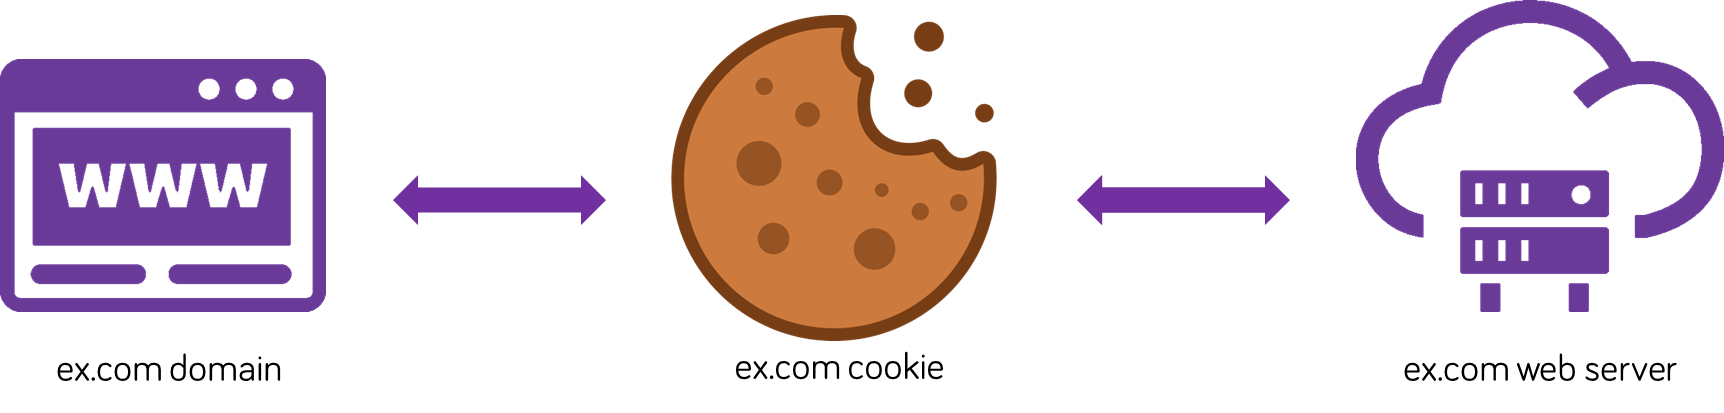 Symbols showing website, cookie and a data cloud